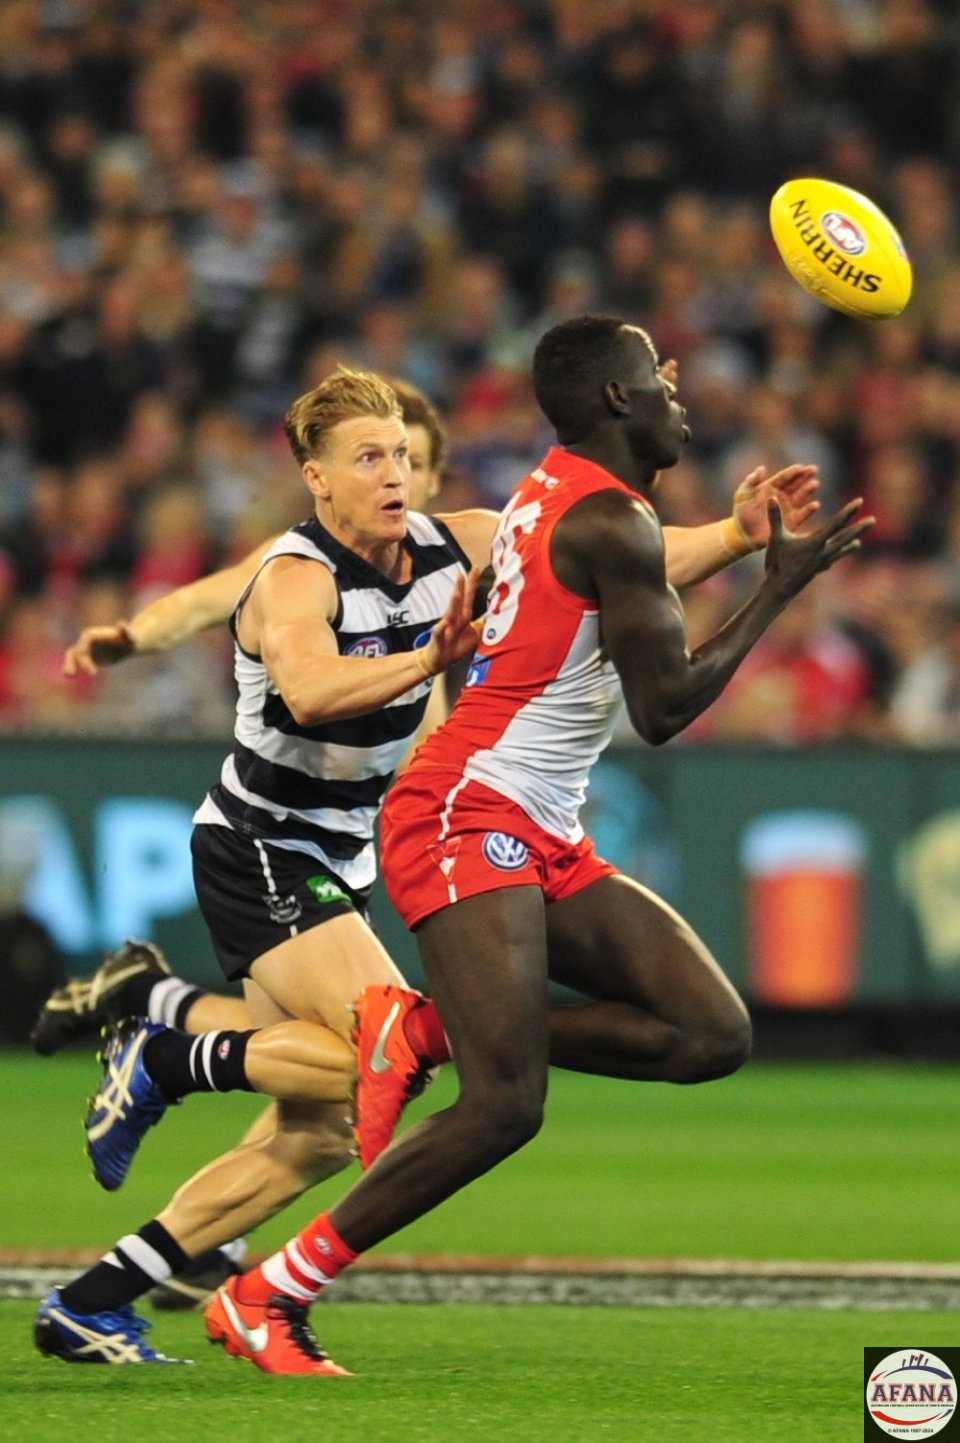 Aliir bursts through running the ball out of the Swans defence